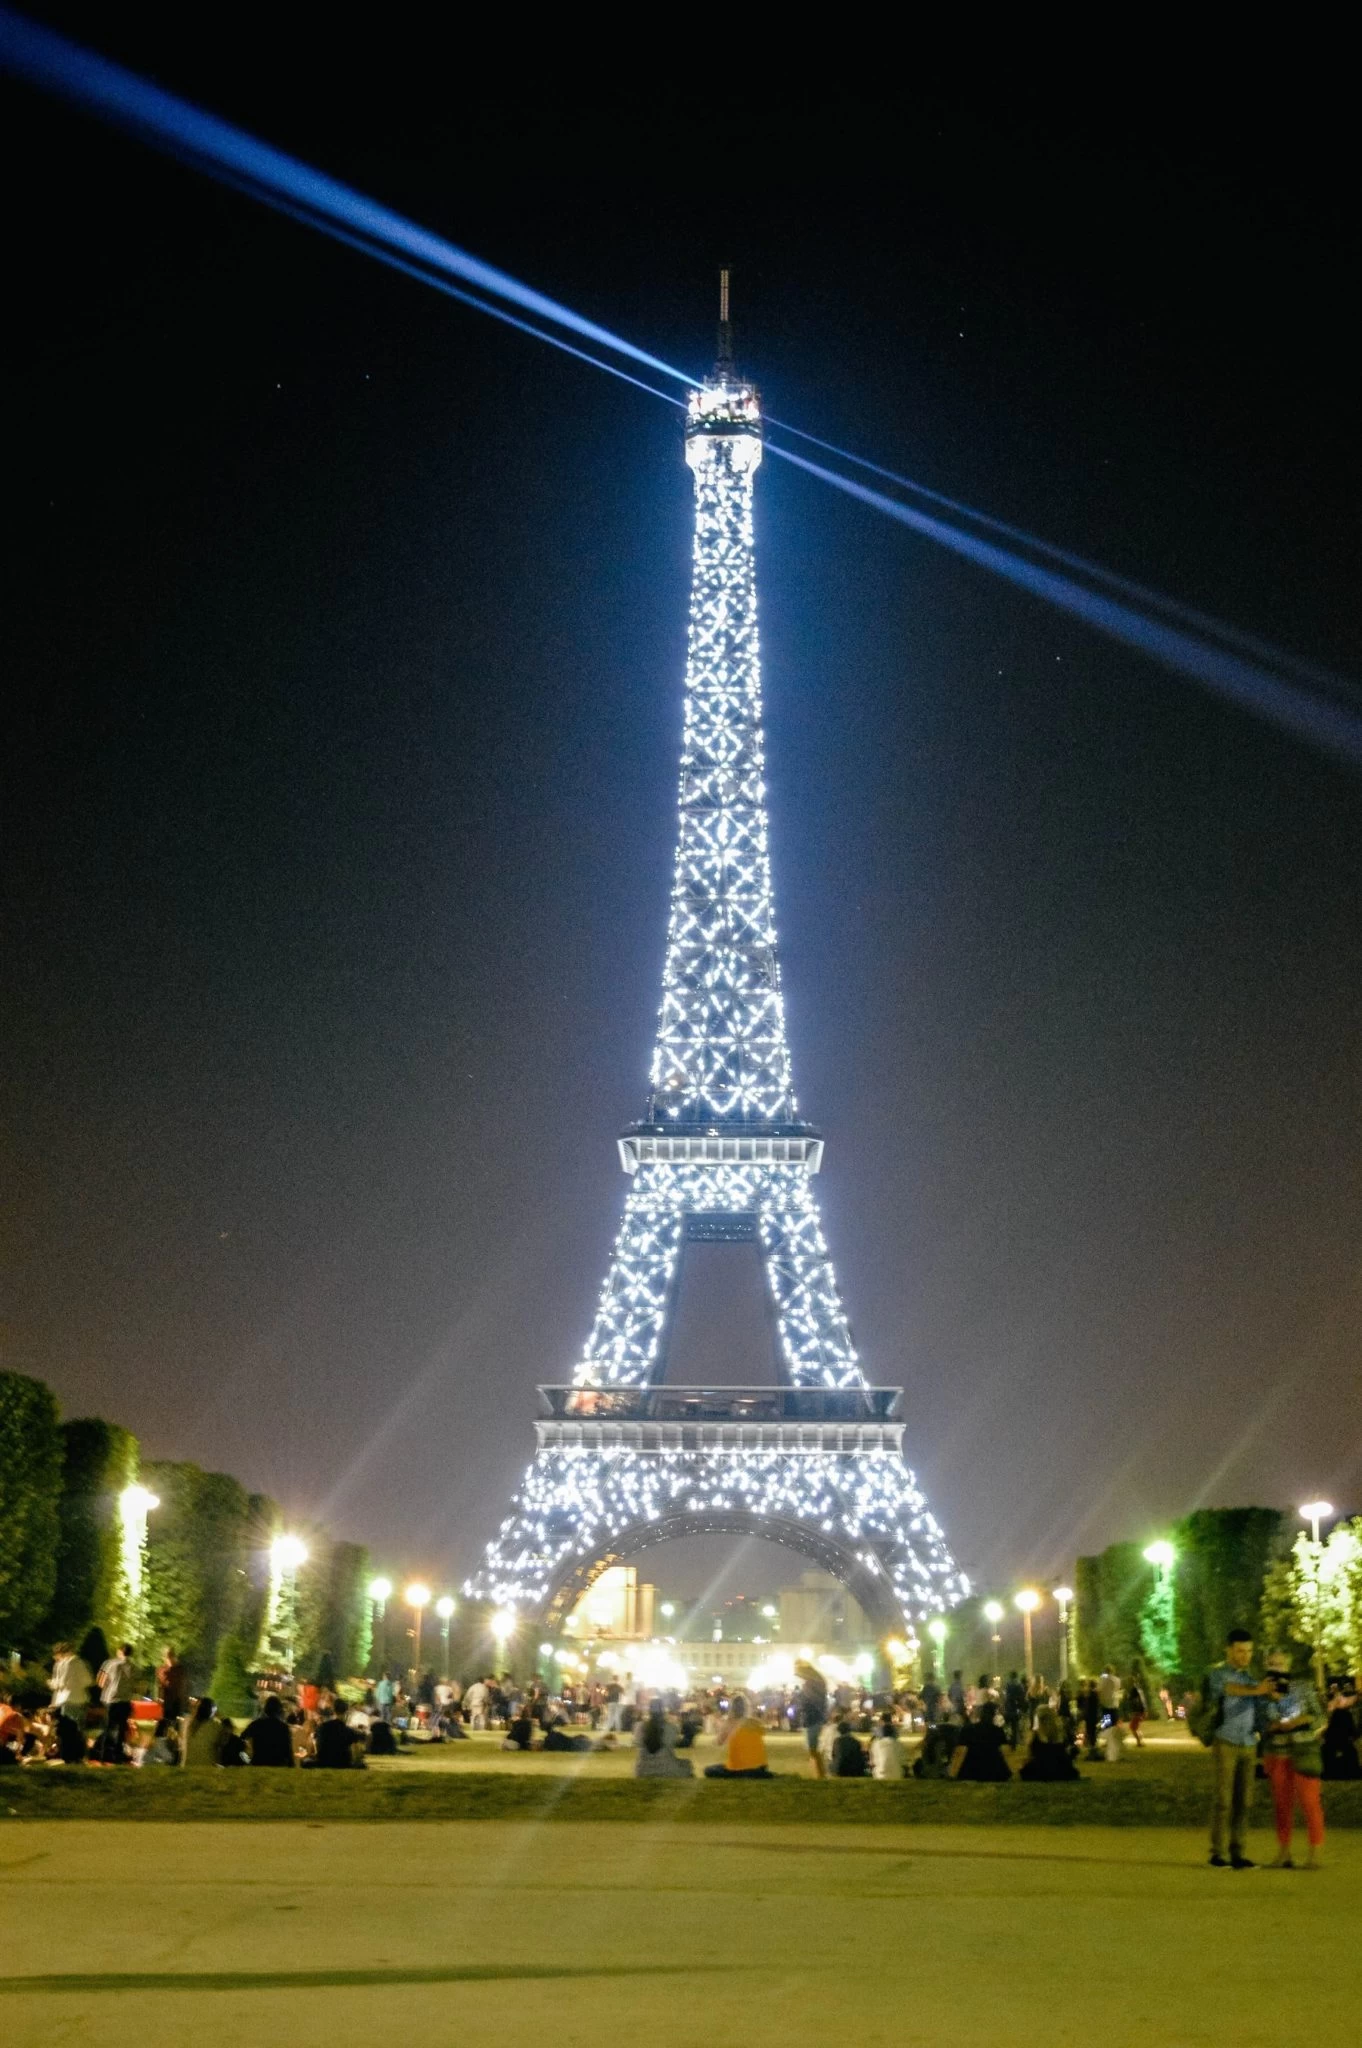 View of the Eiffel tower in Paris at night